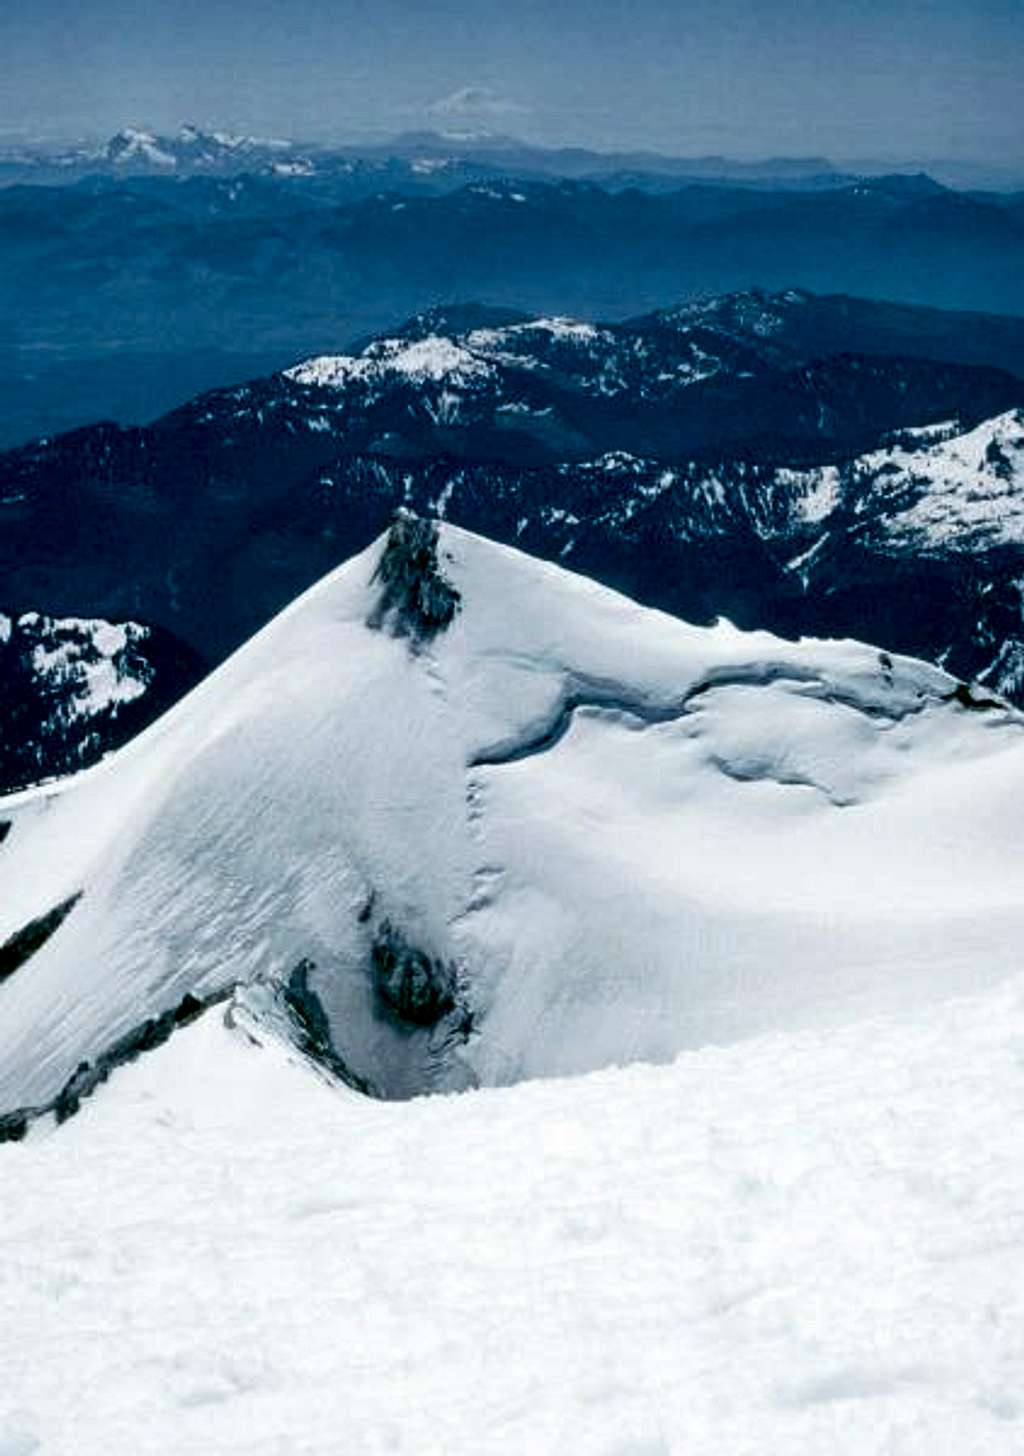 From the summit of Mt. Baker,...